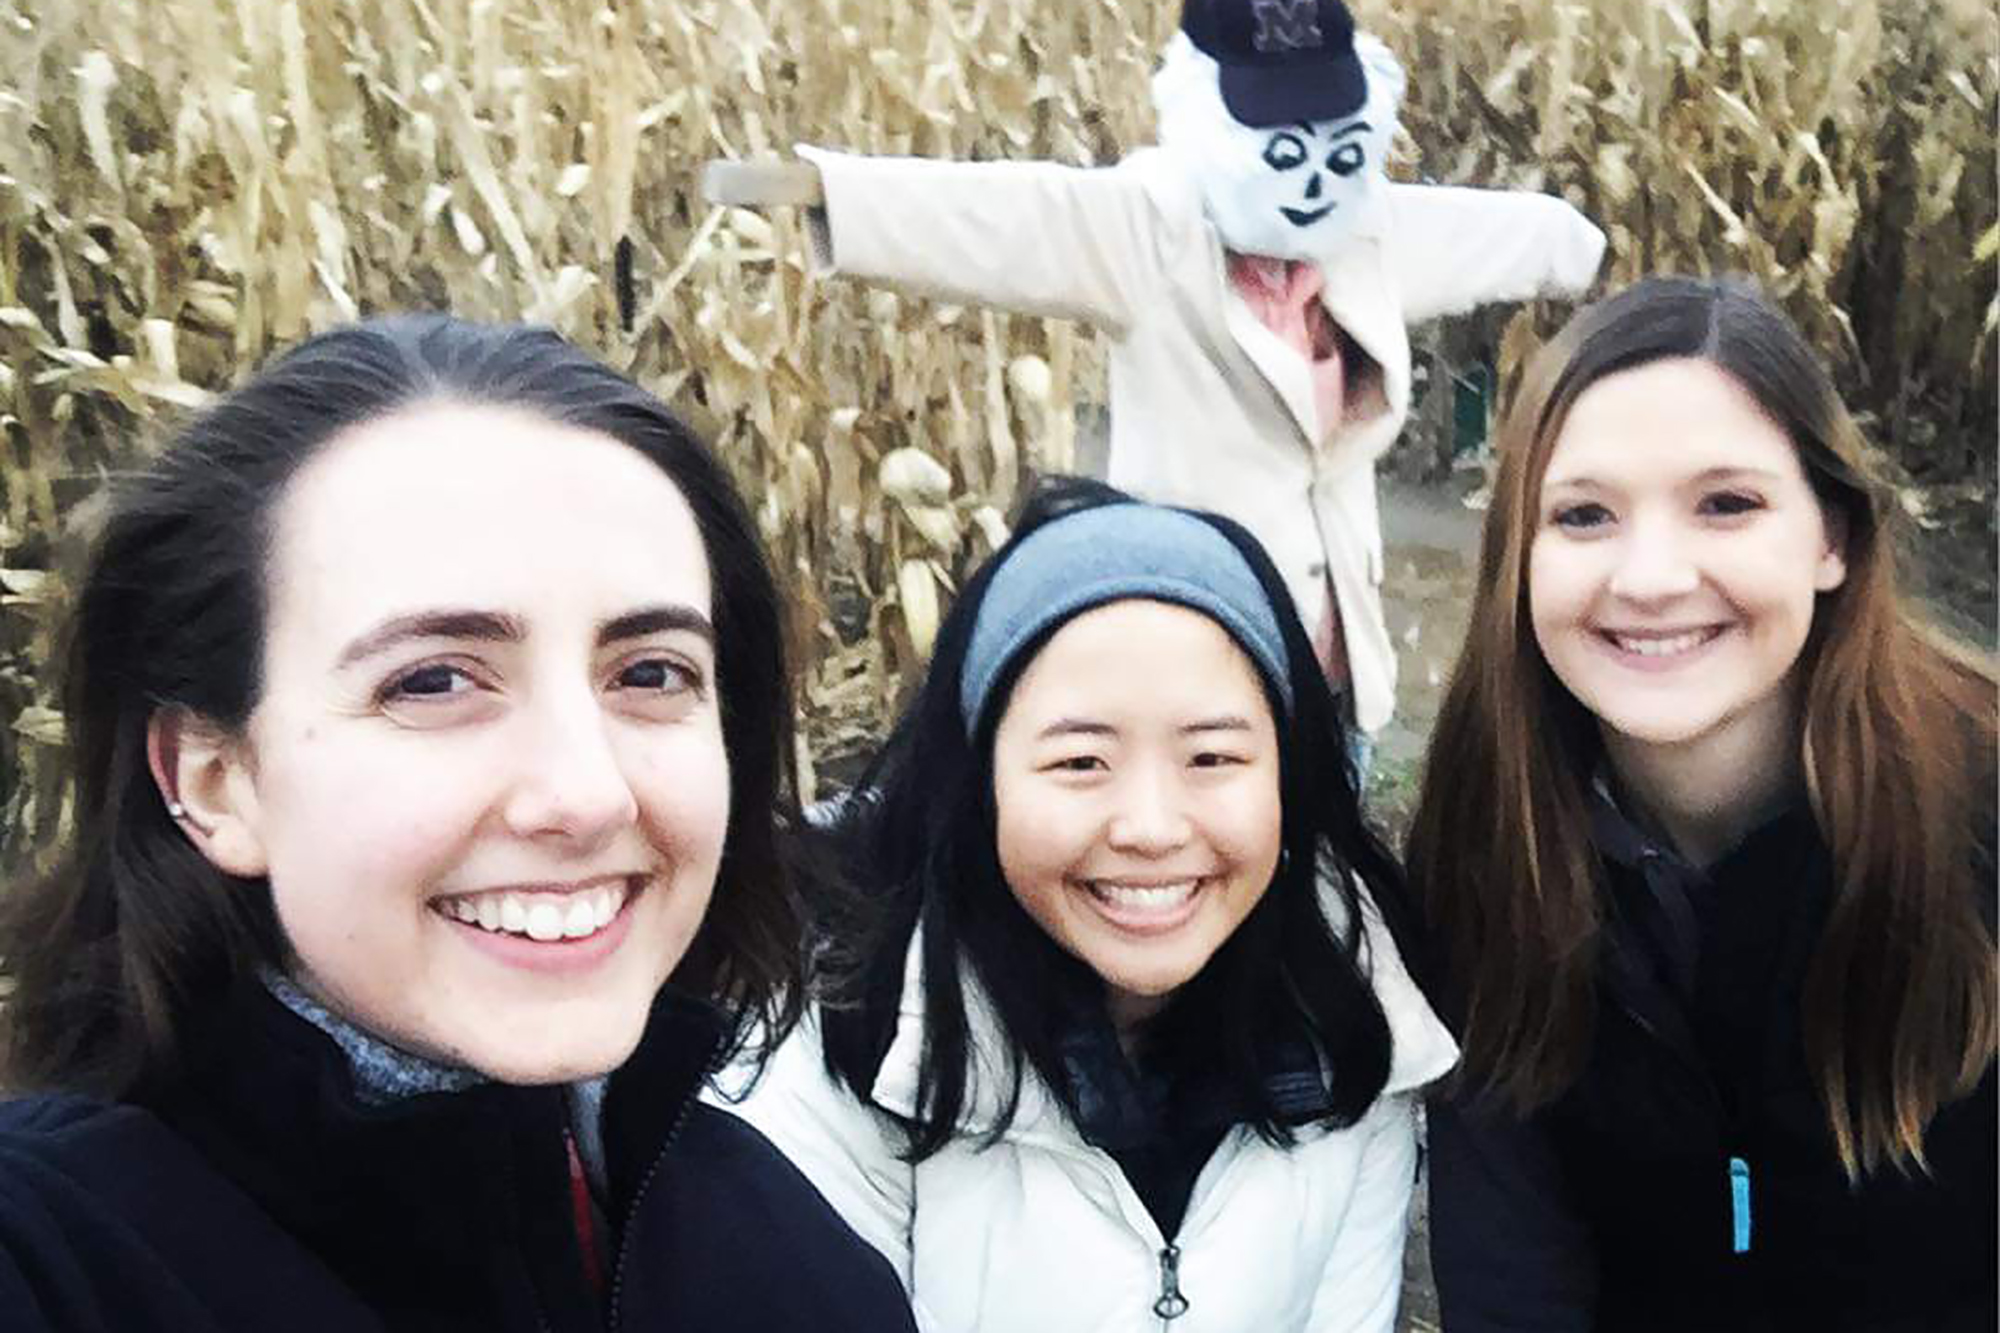 brittany pendergraft and two friends at a corn maze